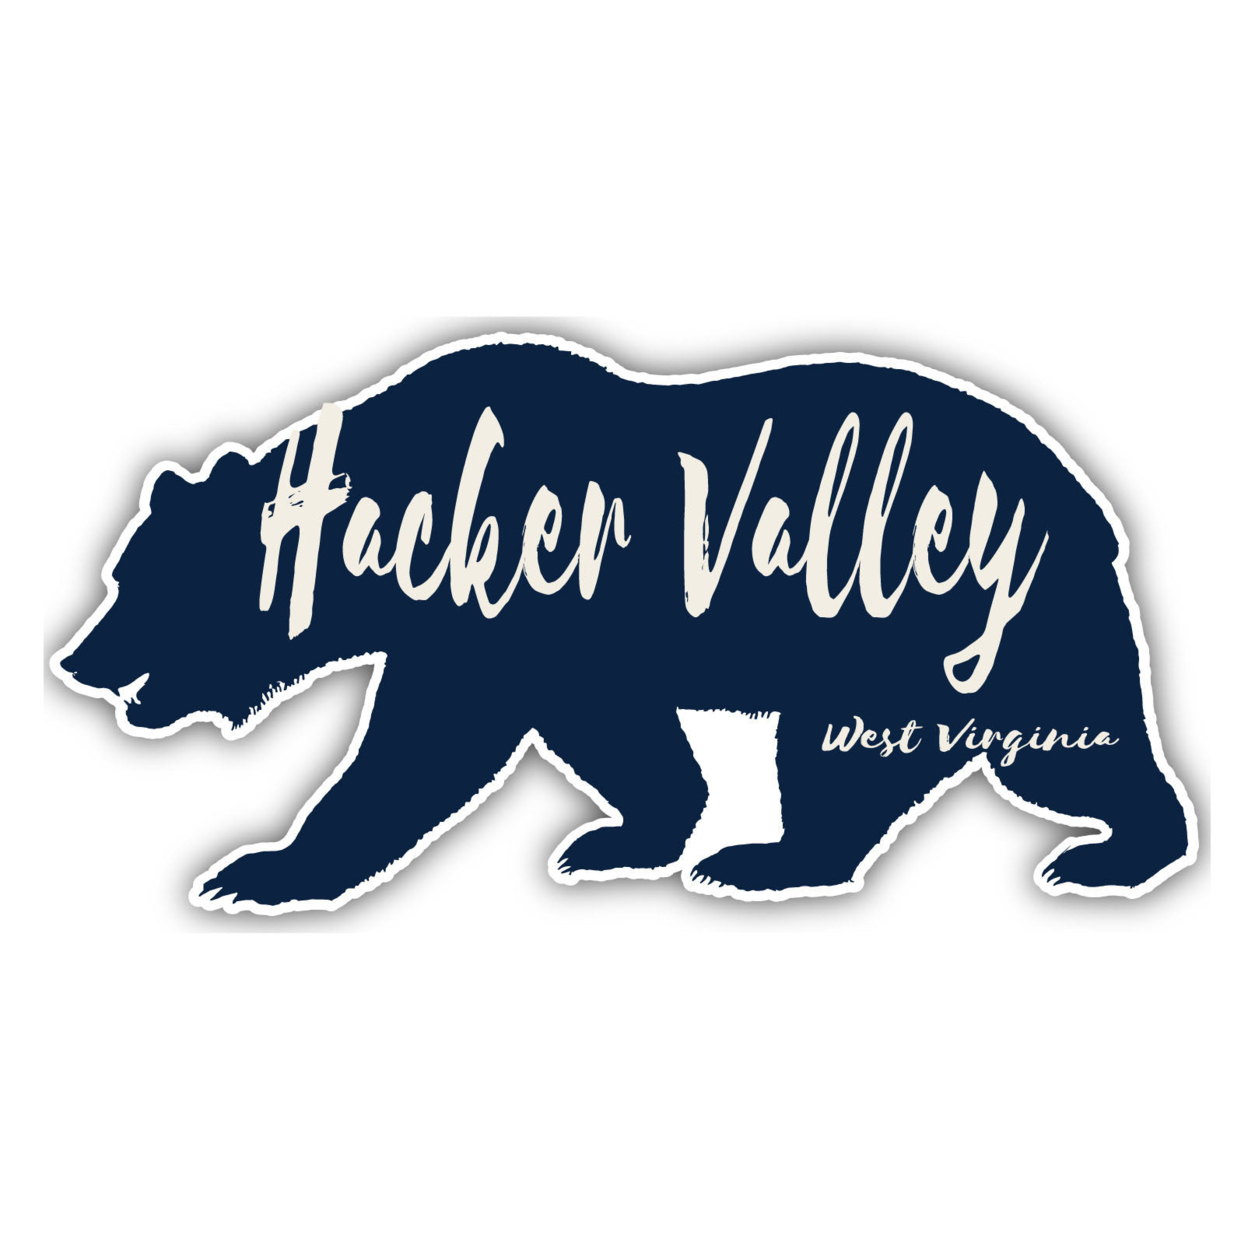 Hacker Valley West Virginia Souvenir Decorative Stickers (Choose Theme And Size) - 4-Pack, 4-Inch, Great Outdoors